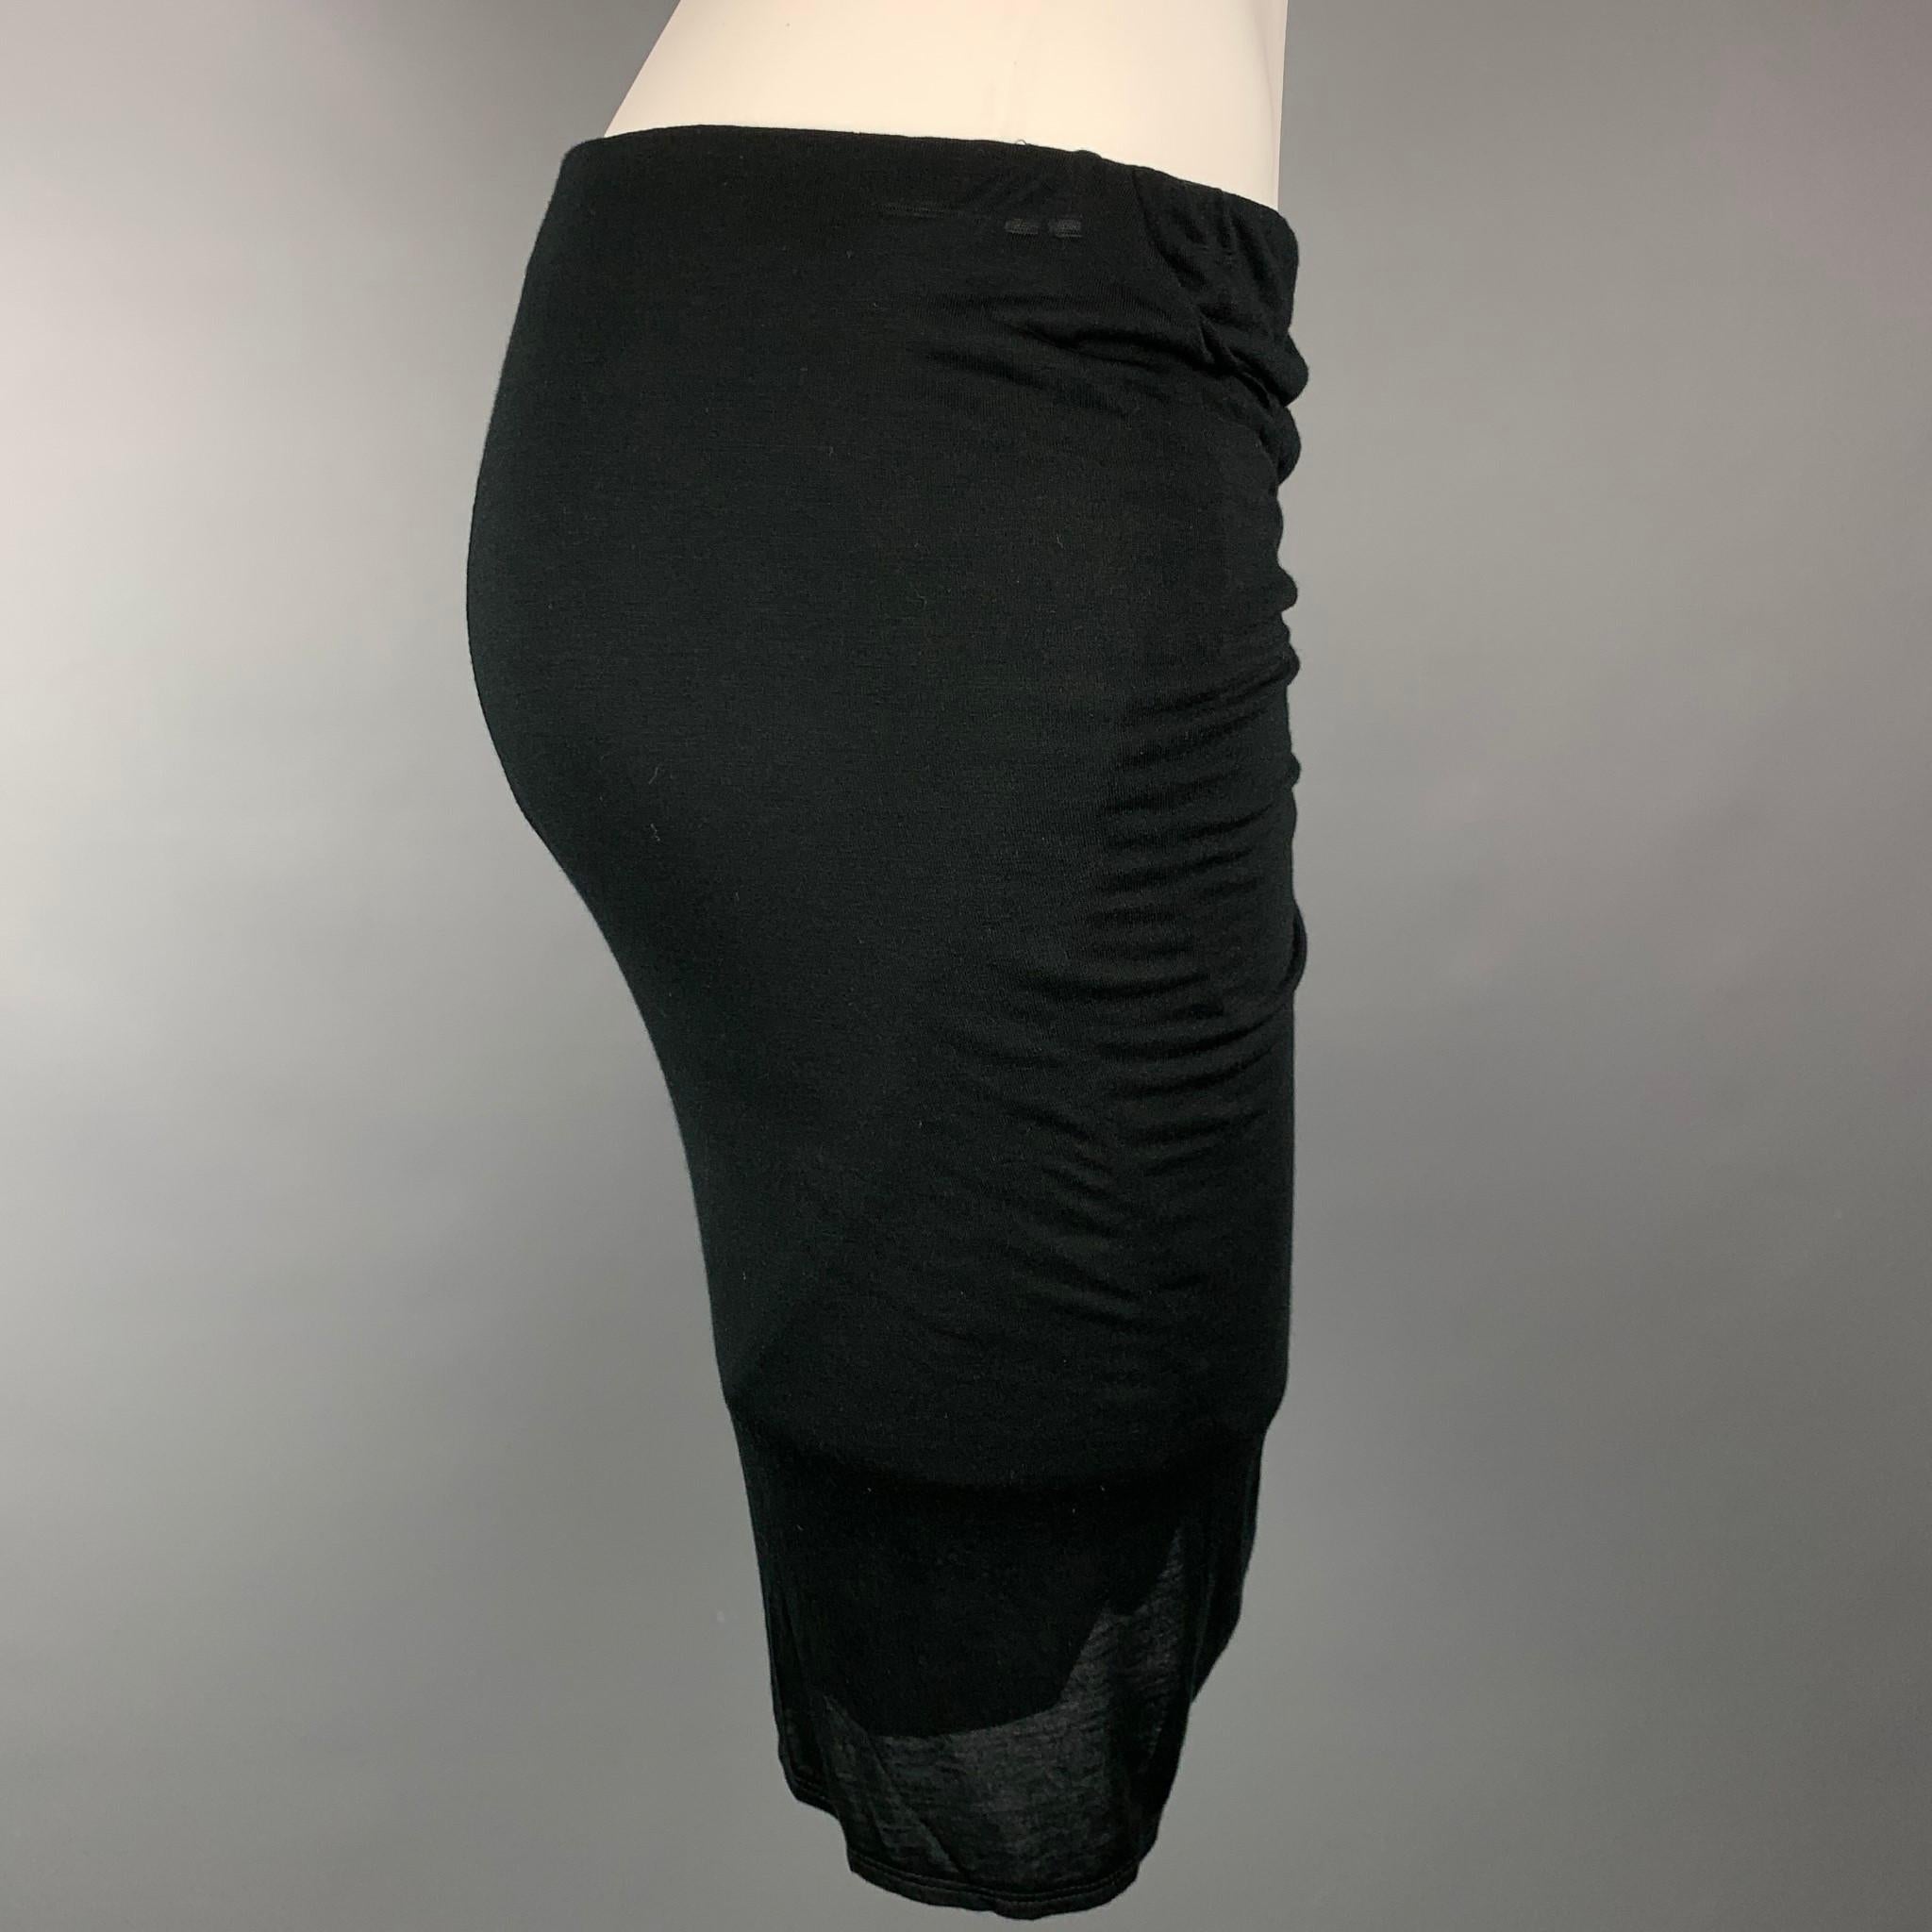 HELMUT LANG mini skirt comes in a black jersey modal featuring a ruched design anda elastic waistband.

New With Tags. 
Marked: S
Original Retail Price: $195.00

Measurements:

Waist: 29 in.
Hip: 34 in.
Length: 21 in. 

